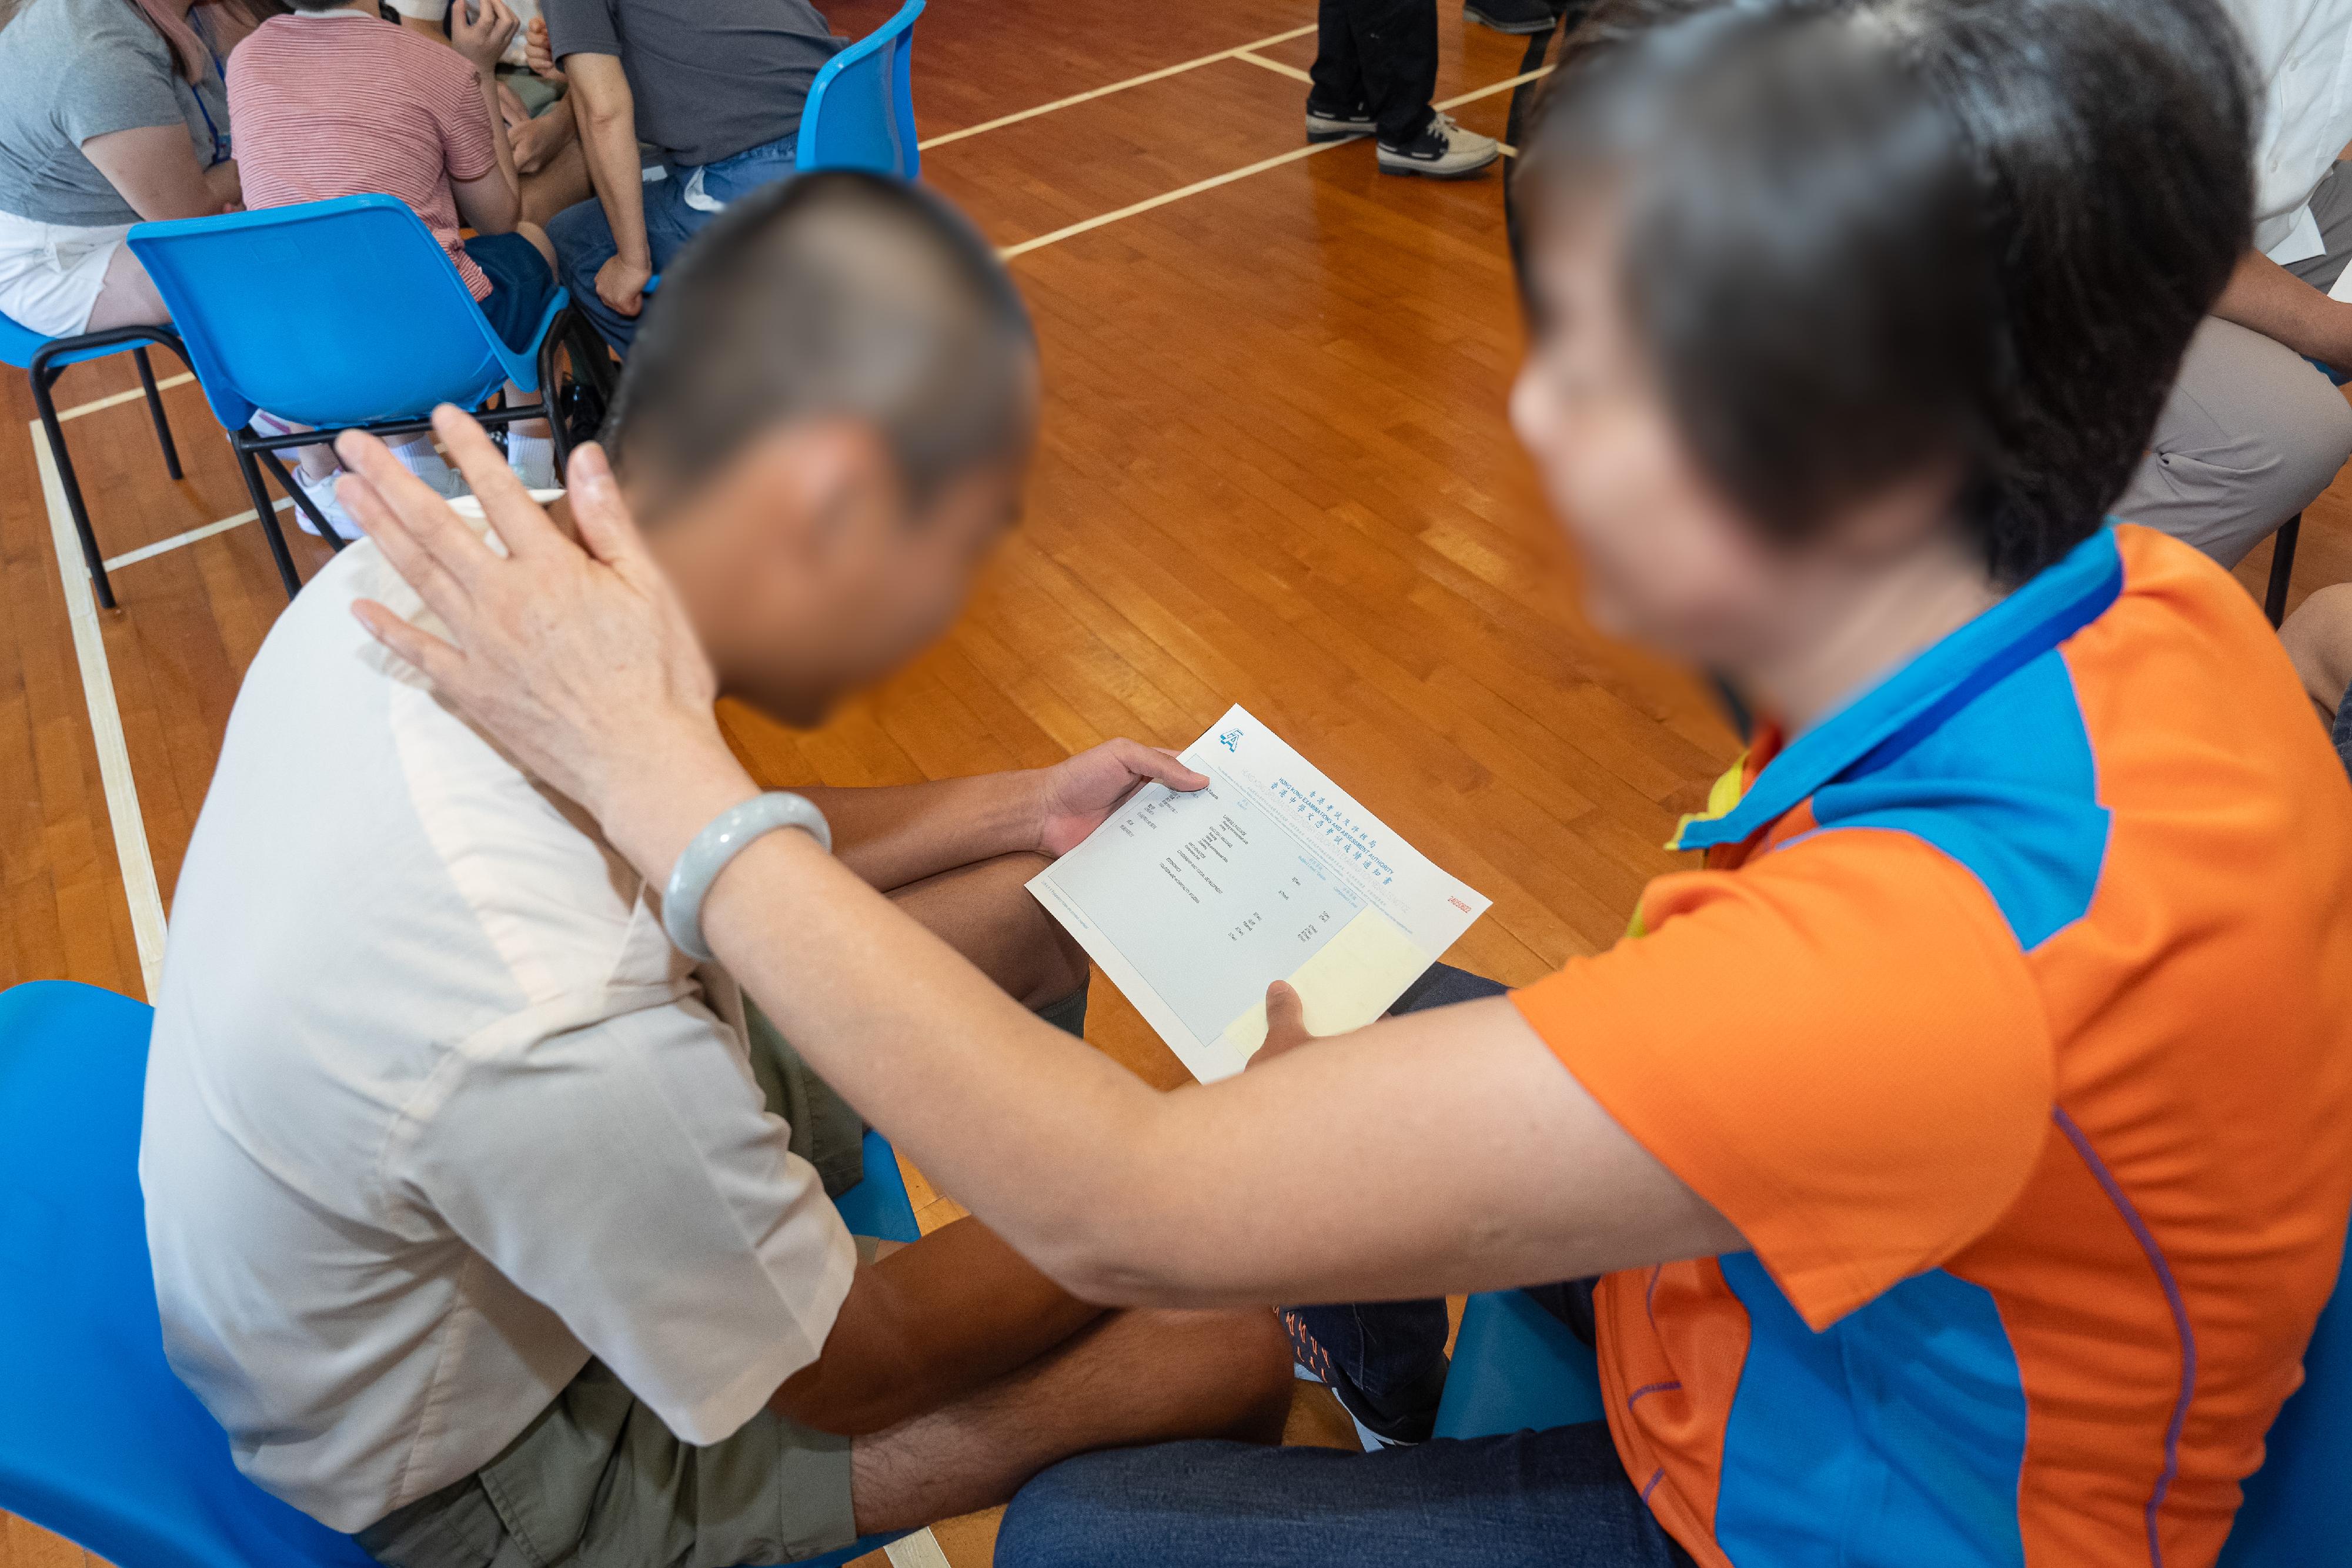 The results of the Hong Kong Diploma of Secondary Education Examination were released today (July 17). Fourteen young persons in custody (PICs) enrolled in the examination this year. Photo shows a young PIC sharing his learning achievement with his family member.